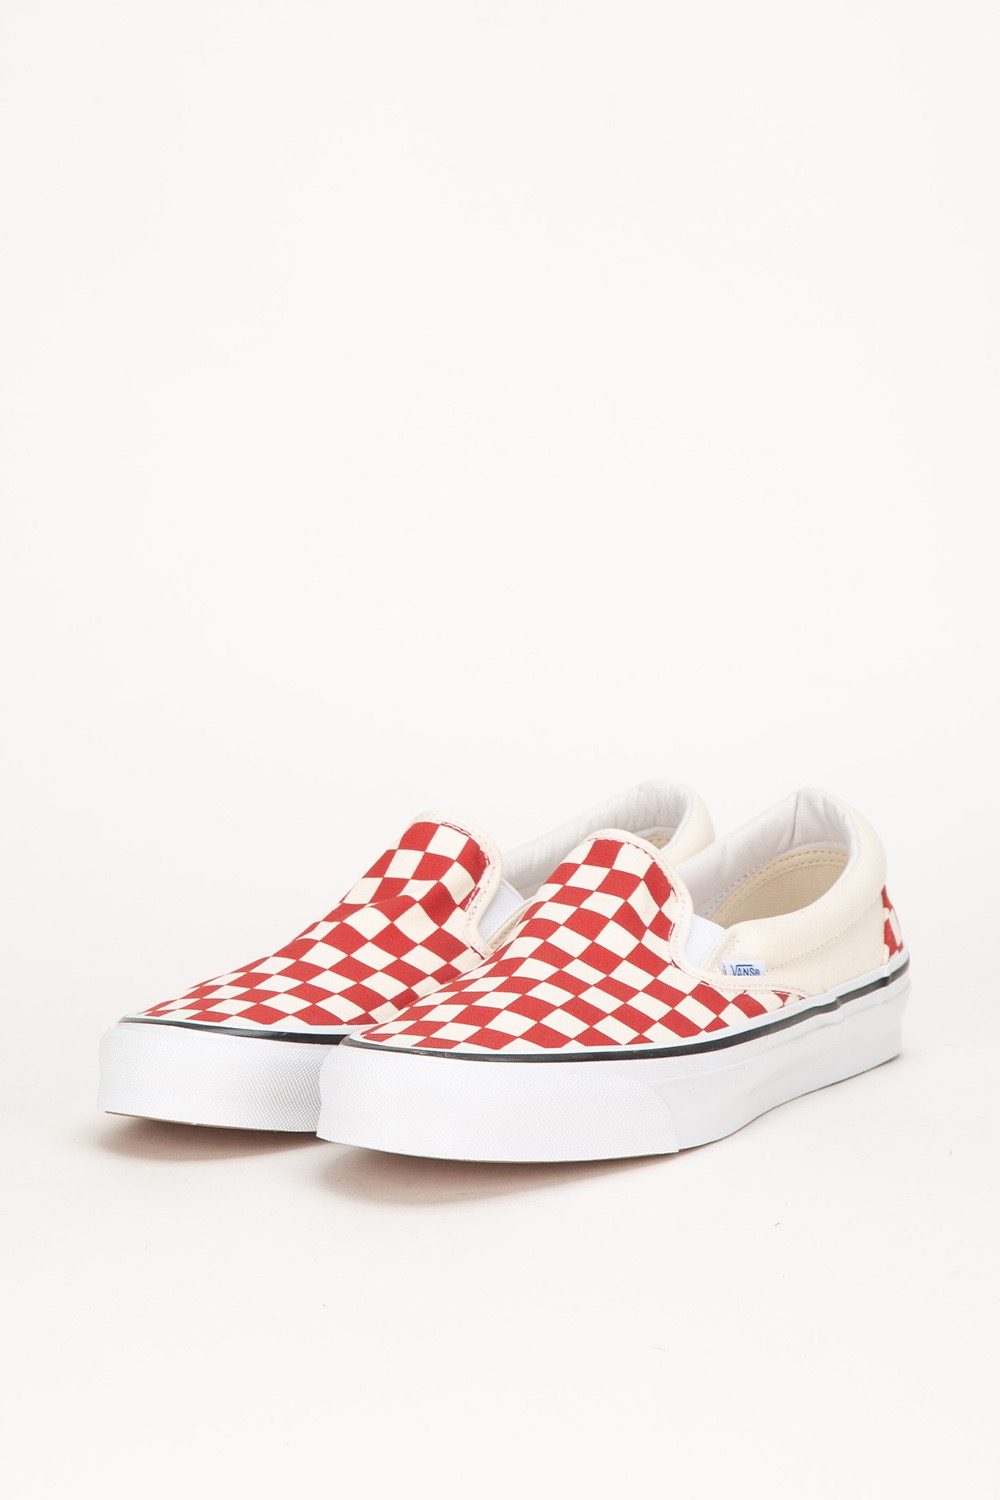 (RESTOCK) OG CLASSIC SLIP-ON LX CHECKERBOARD RACING RED/CLASSIC WHITE